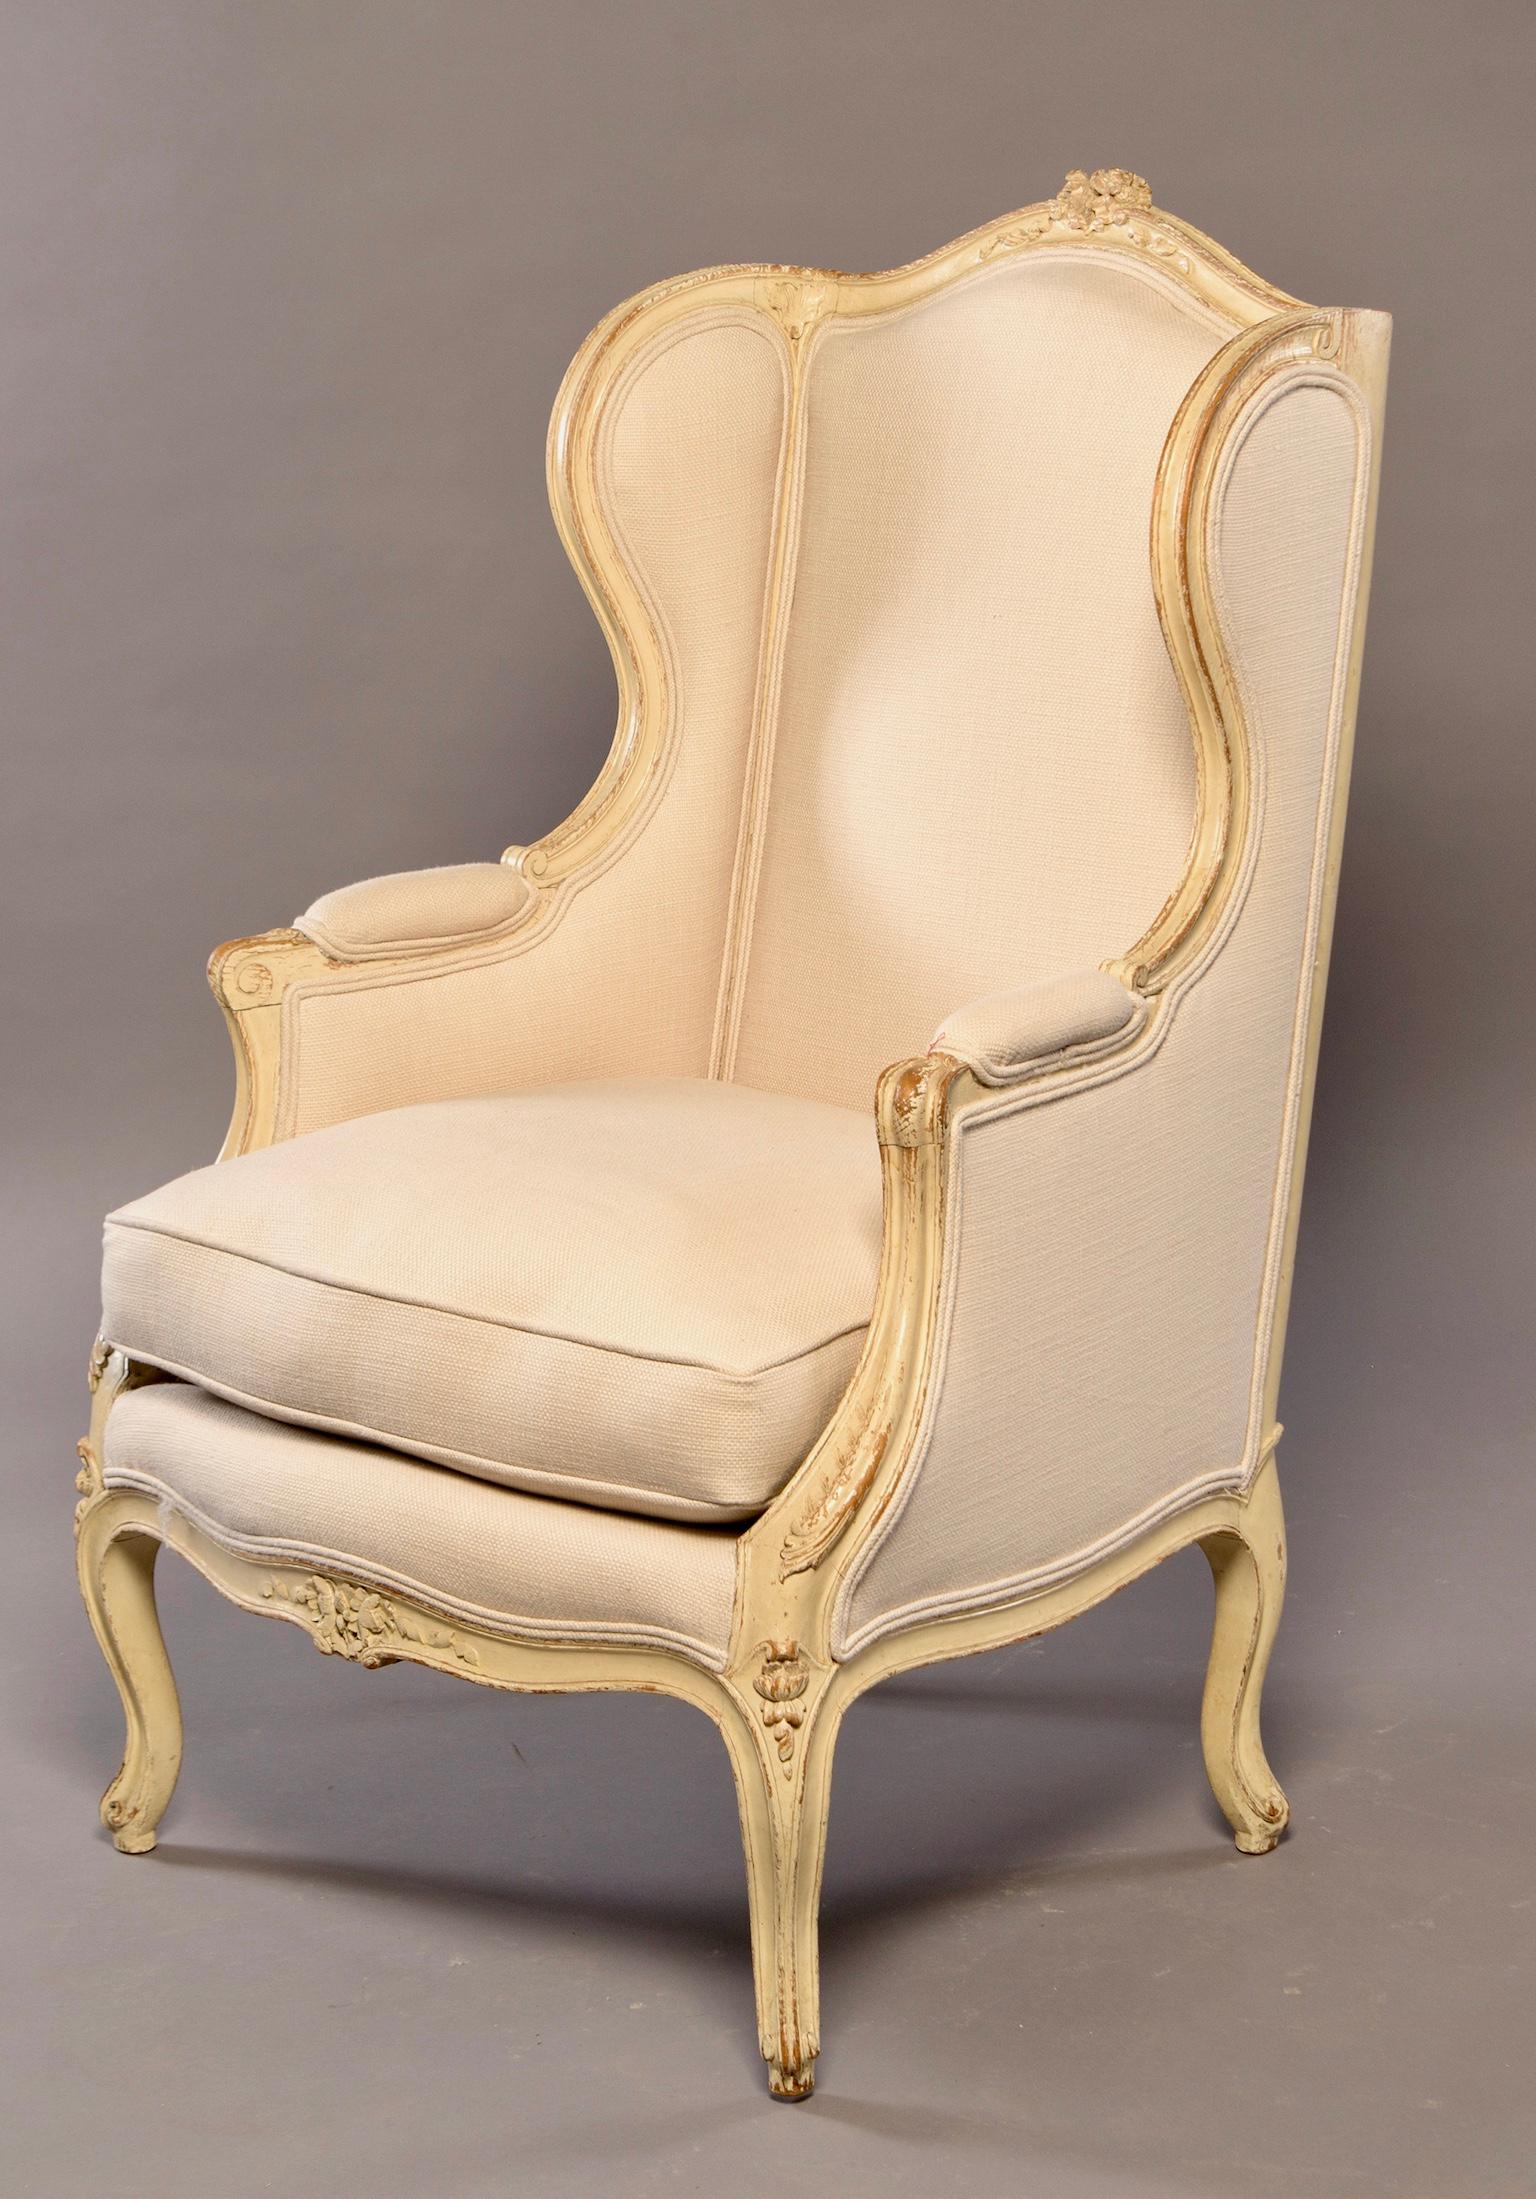 French bergère has carved and painted frame with cabriole legs, and ornamental detail on apron, carved details on the arms and a decorative crest on the seat back, circa 1620. Wing back style with padded arms and newly upholstered in a bone colored